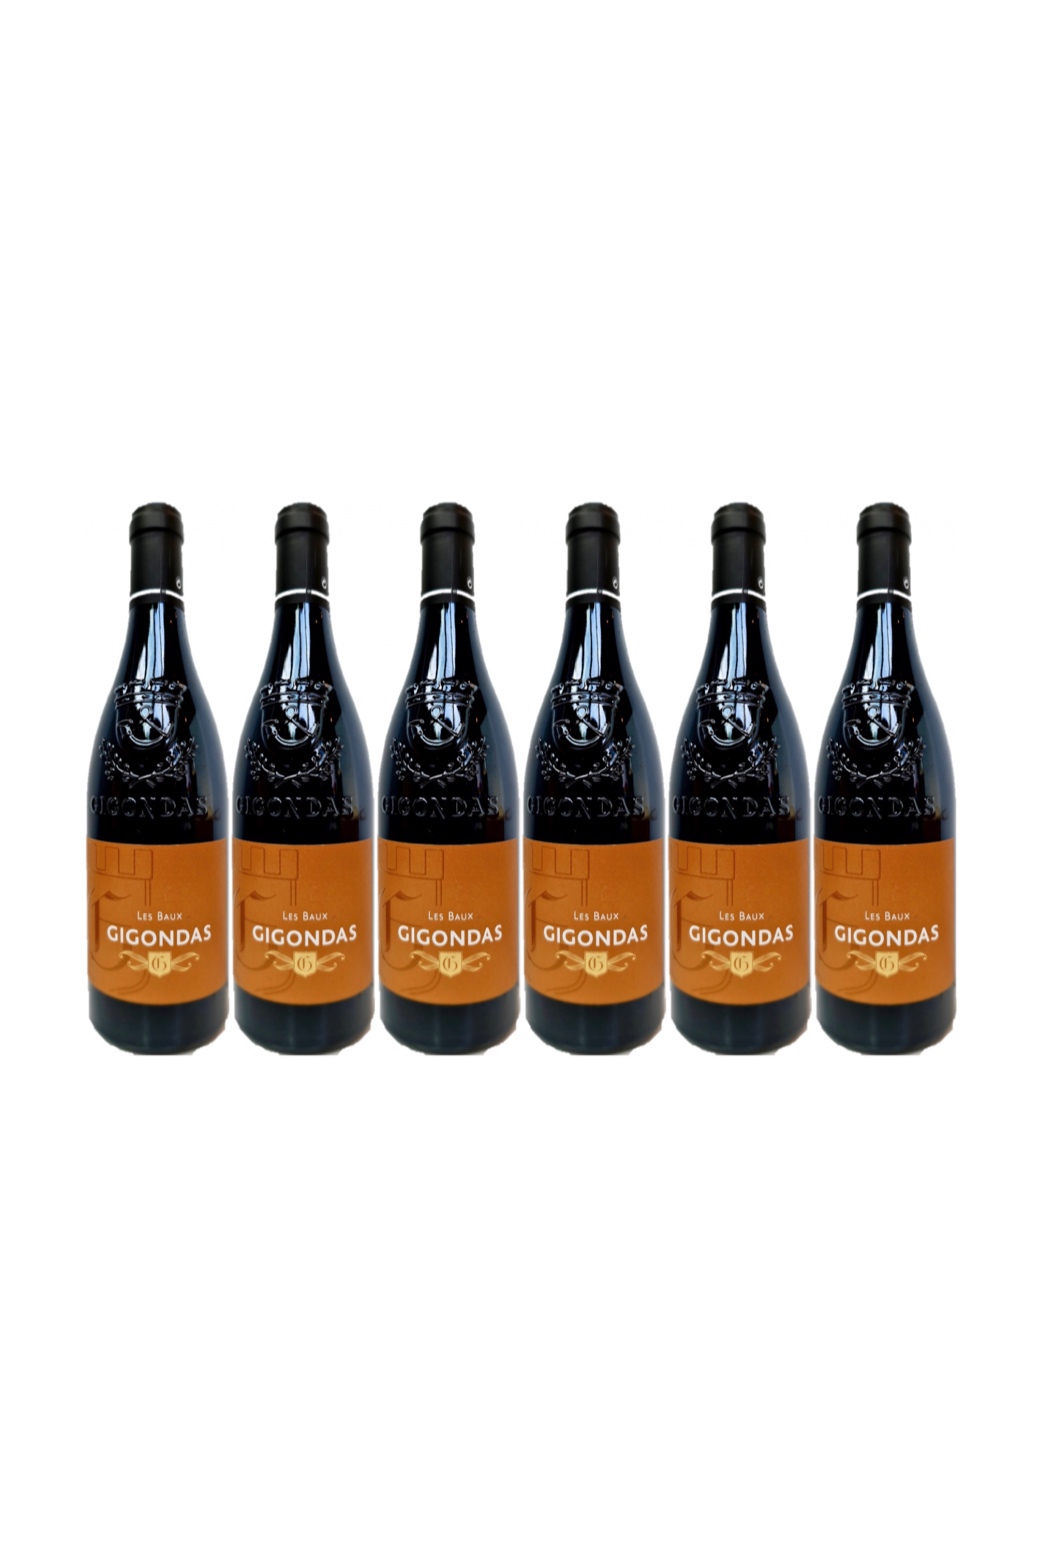 6 bottles of Domaine la Guintrandy Gigondas 2017 at $48 per bottle and get a Free Set of 6 Schott Zwiesel Invento Bordeaux Wine Glass worth $90